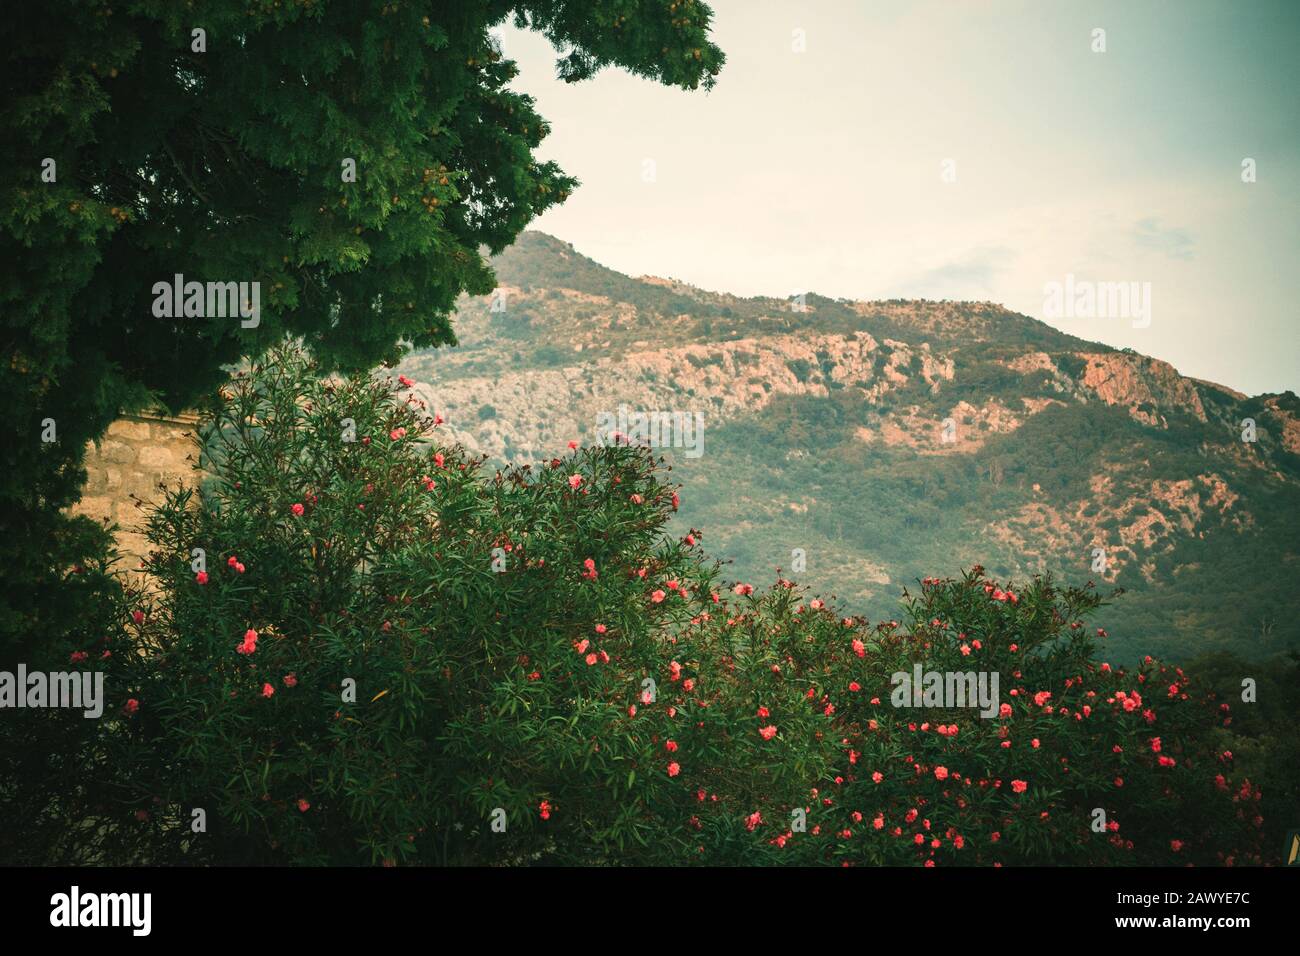 Mountain view through trees and a flowering bush of pink jasmine flowers at sunset in the nebula. Template for design. Copy space. Stock Photo